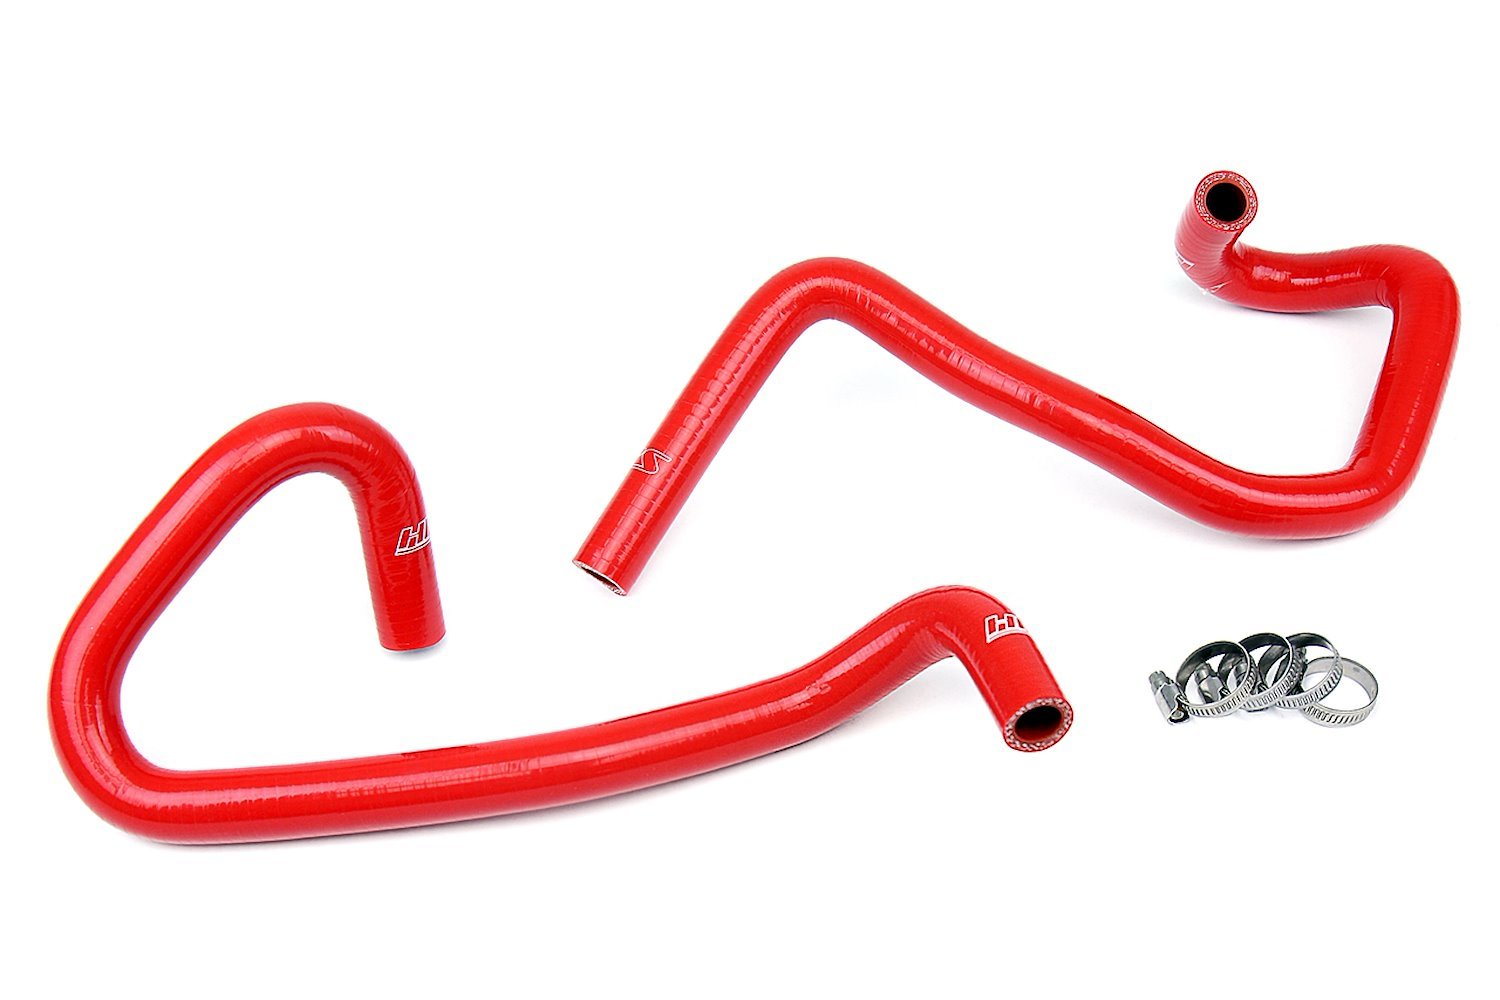 57-1470-RED Heater Hose Kit, High-Temp 3-Ply Reinforced Silicone, Replace OEM Rubber Heater Coolant Hoses